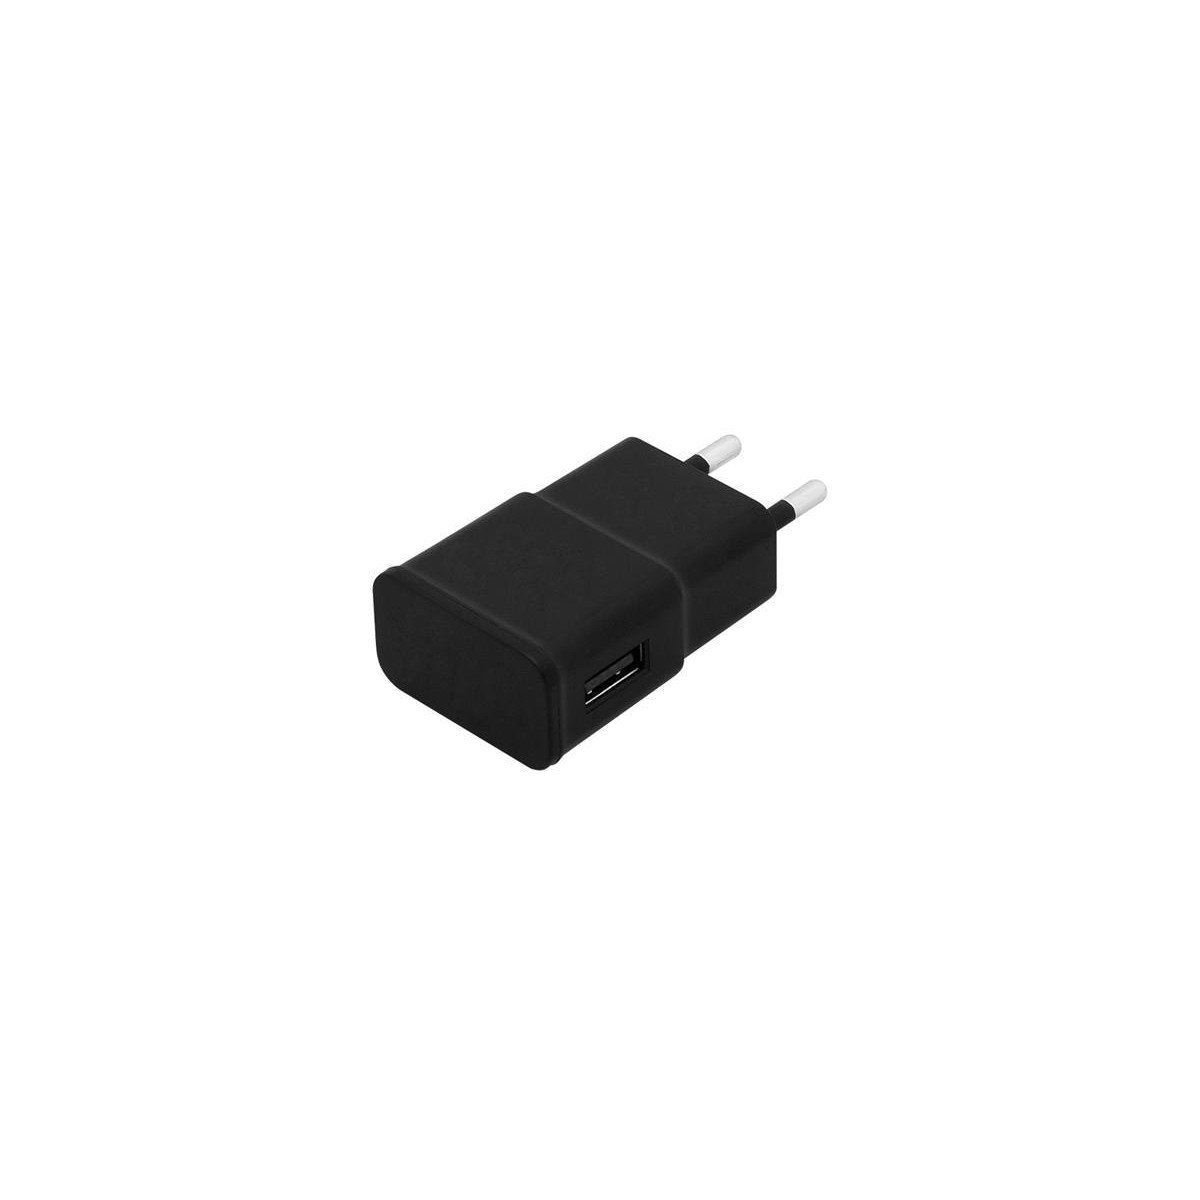 More about Adaptér USB BLOW H21B